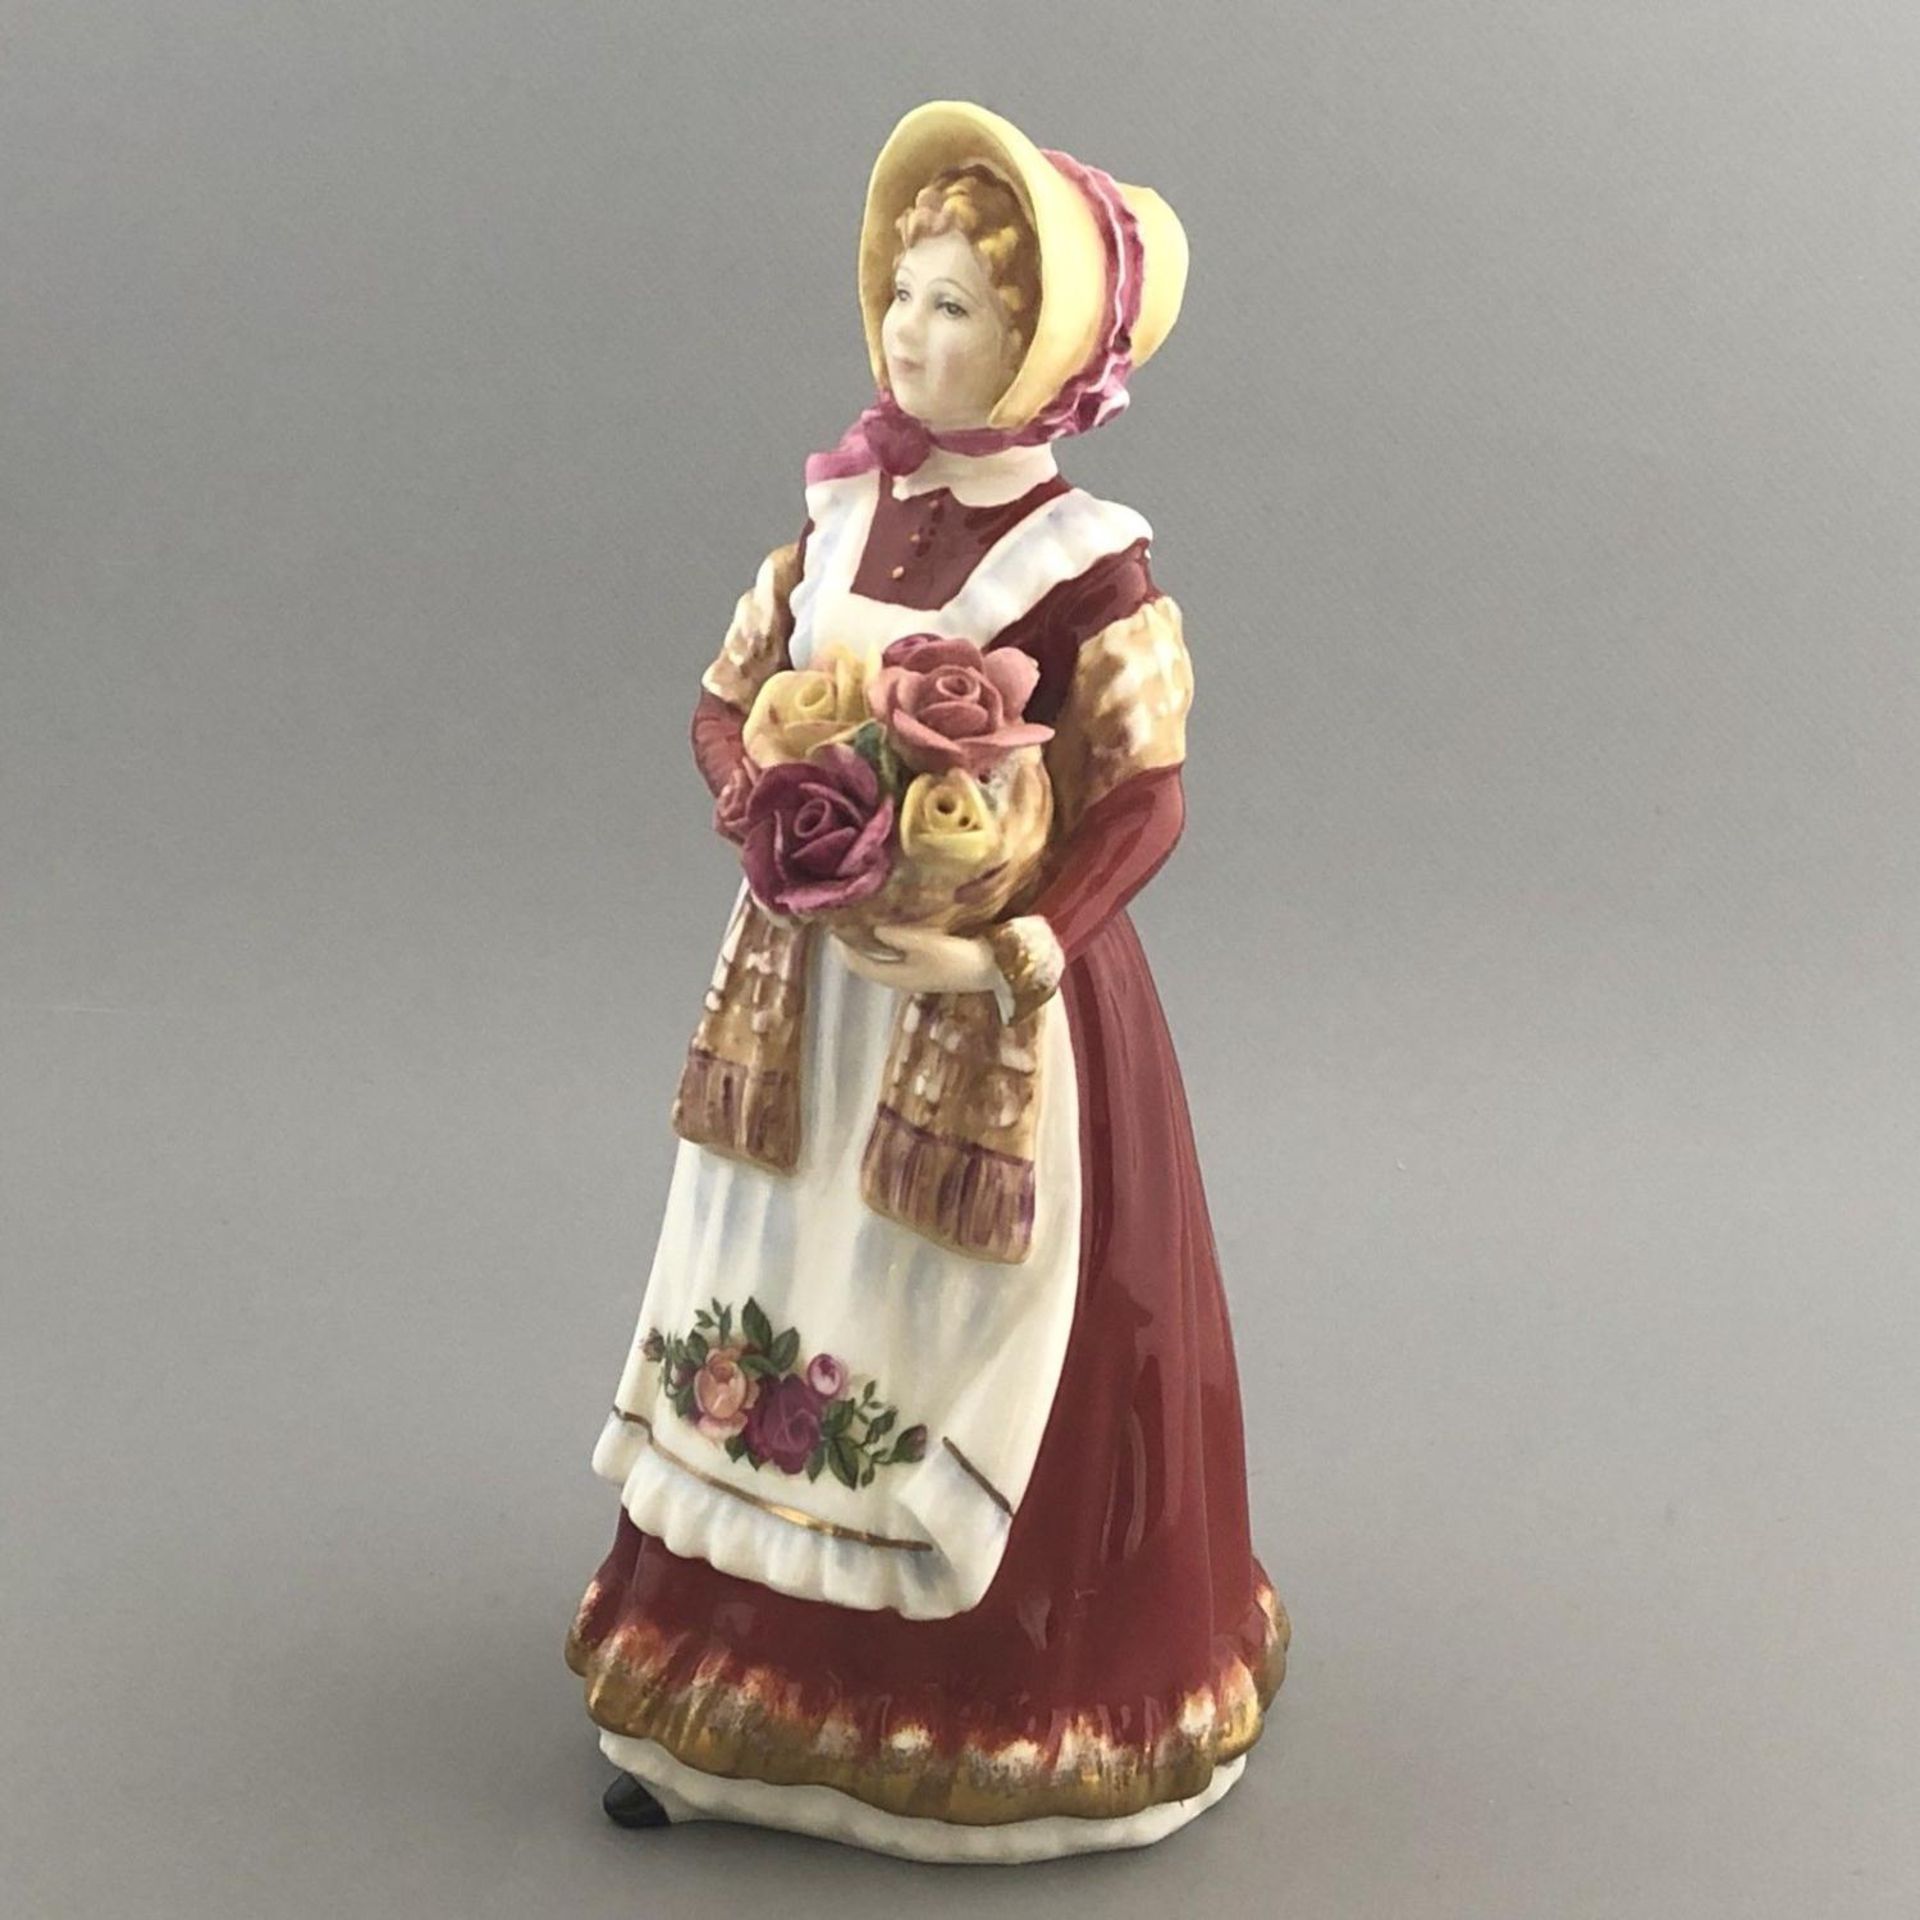 English Porcelain Figurine "Old Country Roses" - Royal Doulton HN 3692 - Image 2 of 7